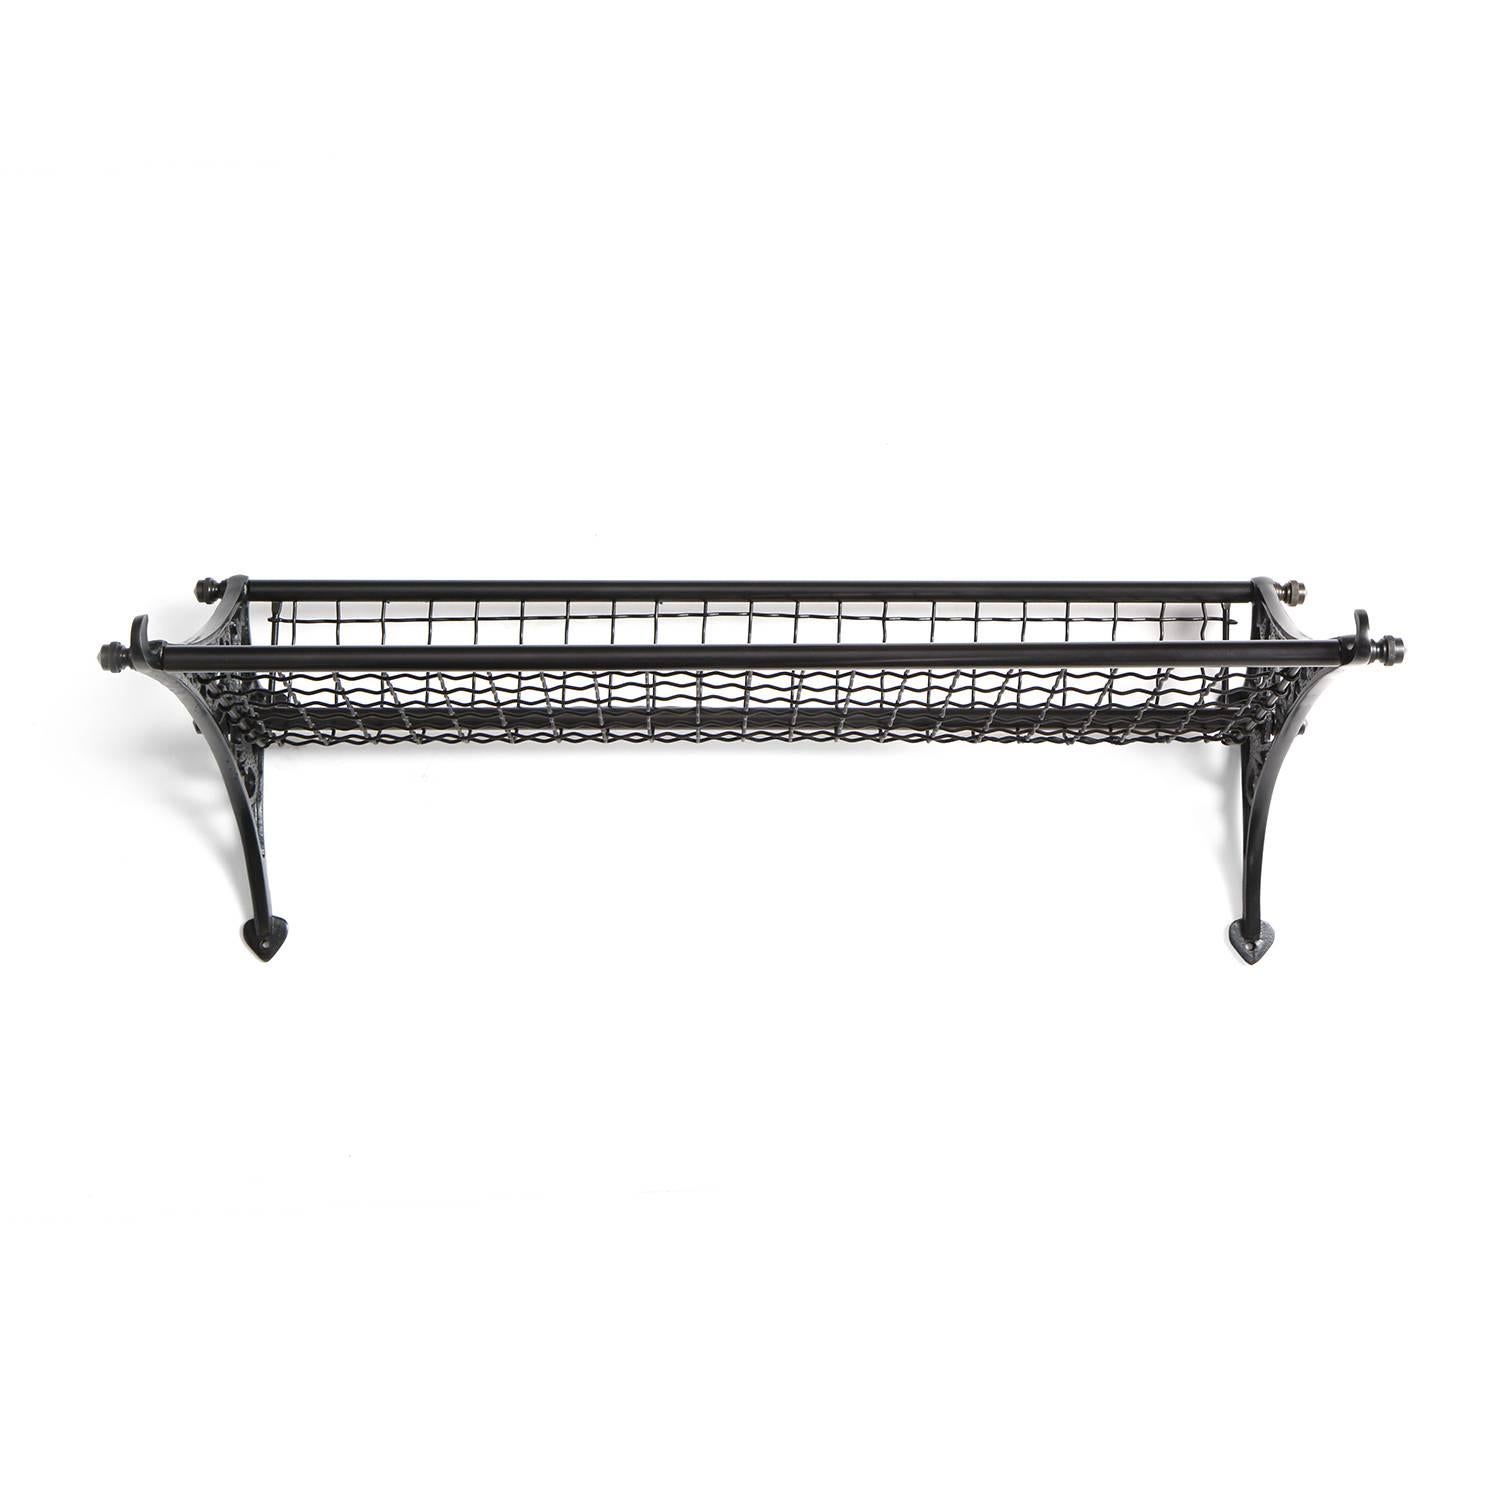 A finely crafted patinated cast iron train rack having expressive scrolling open fretwork sides and a woven metal mesh surface.